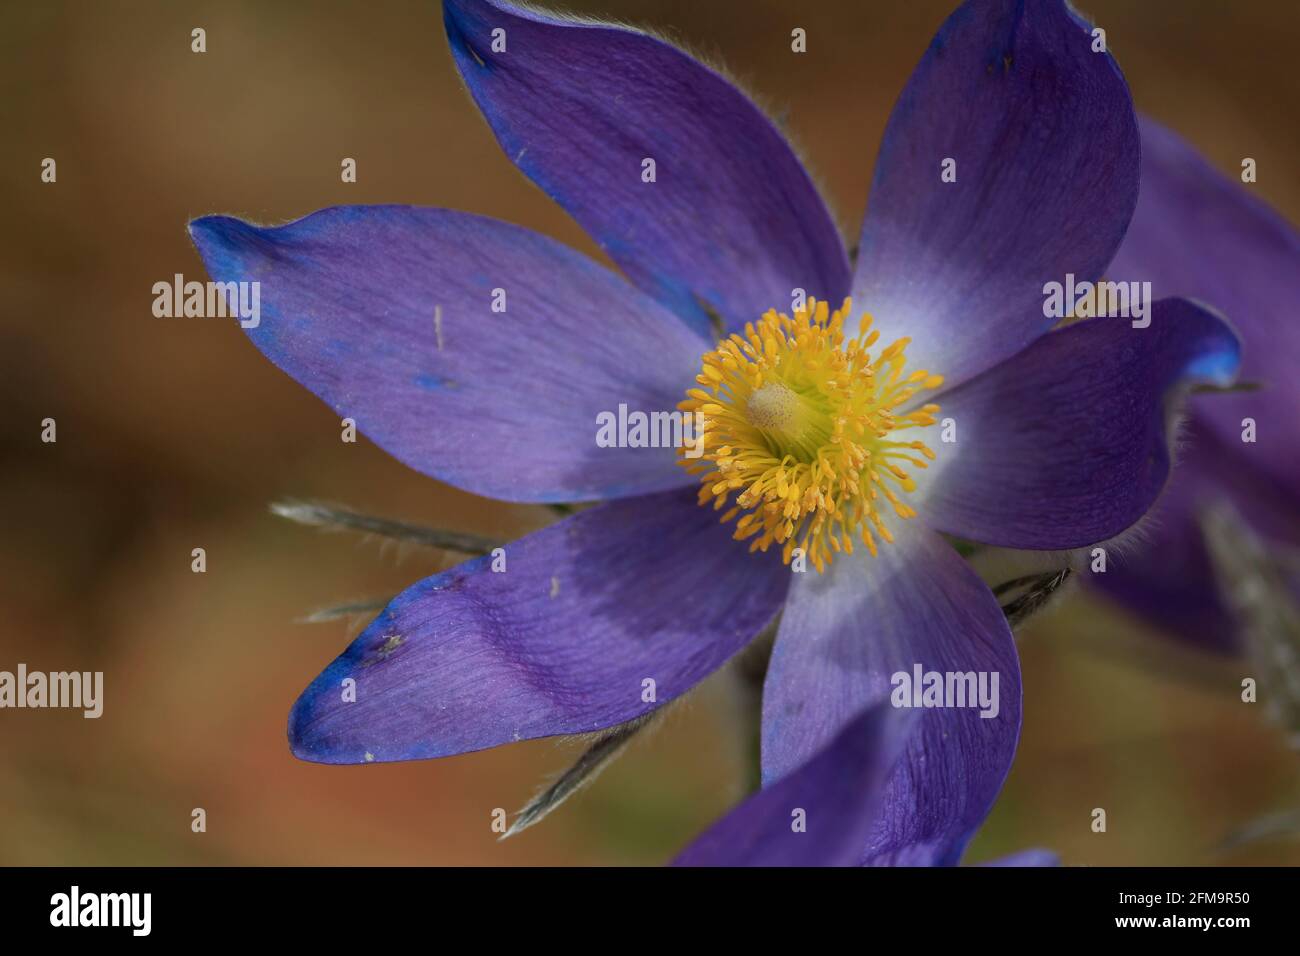 Pulsatilla patens, eastern pasqueflower, spreading anemone. Purple pasqueflower head with yellow stamen close-up in sunlight outdoors in springtime. Stock Photo